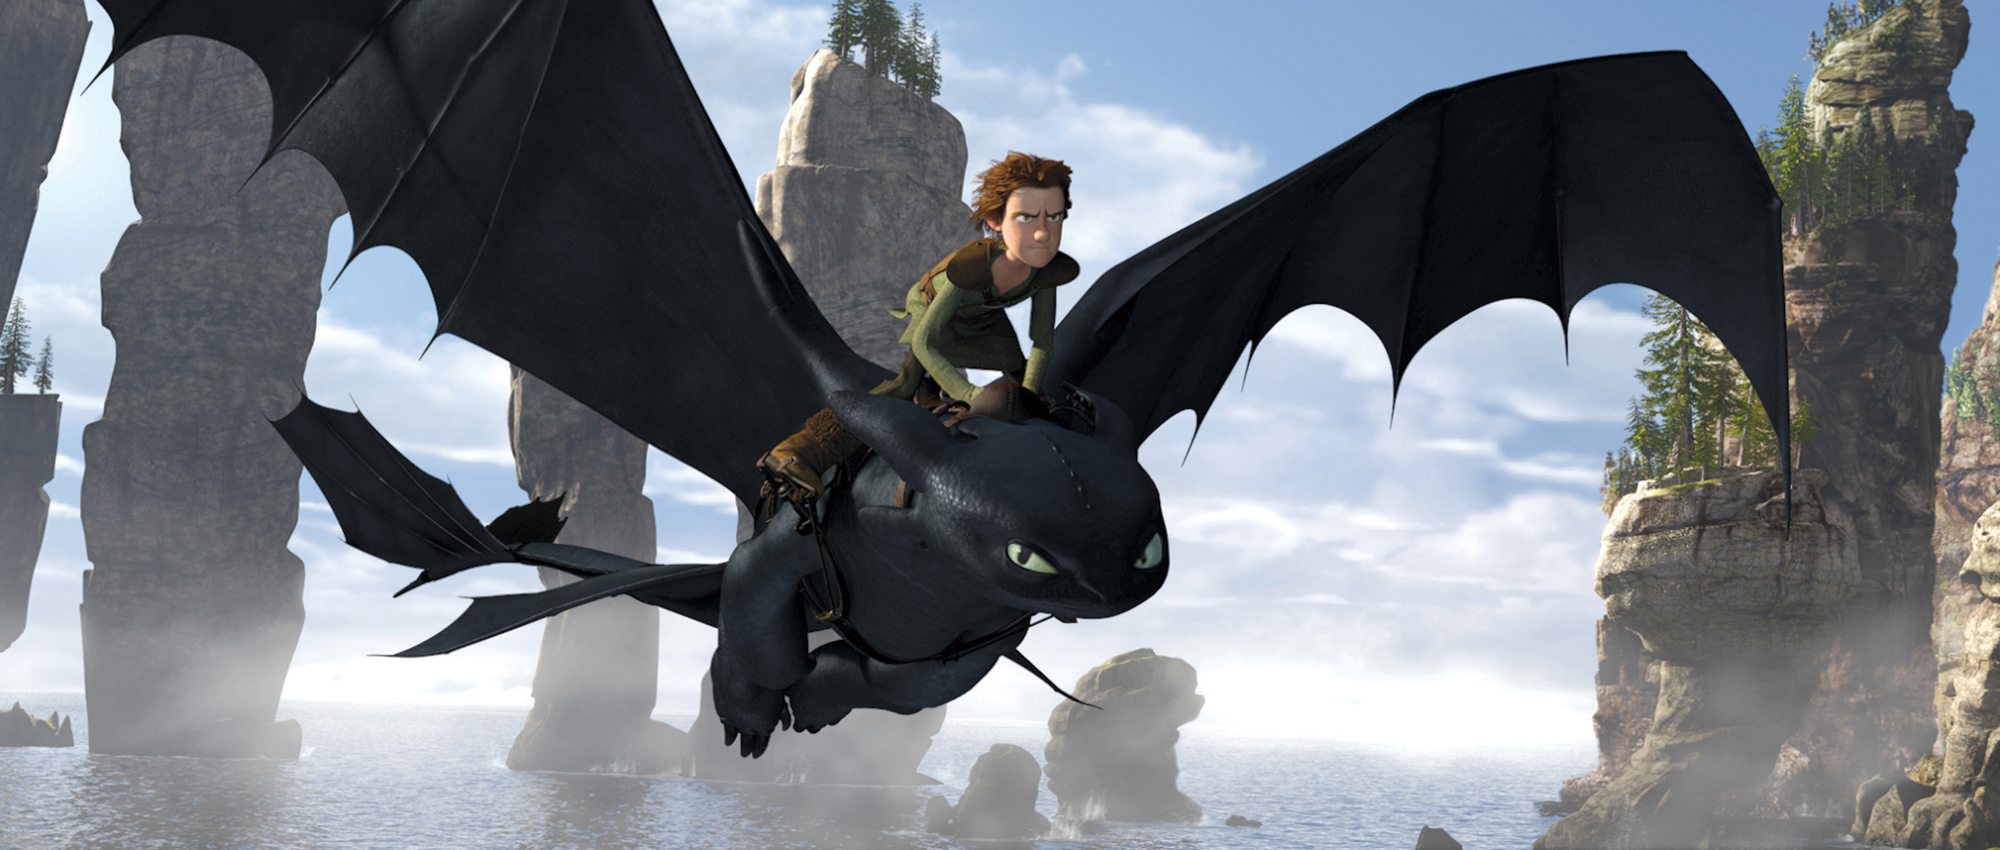 HQ How To Train Your Dragon Wallpapers | File 893.22Kb